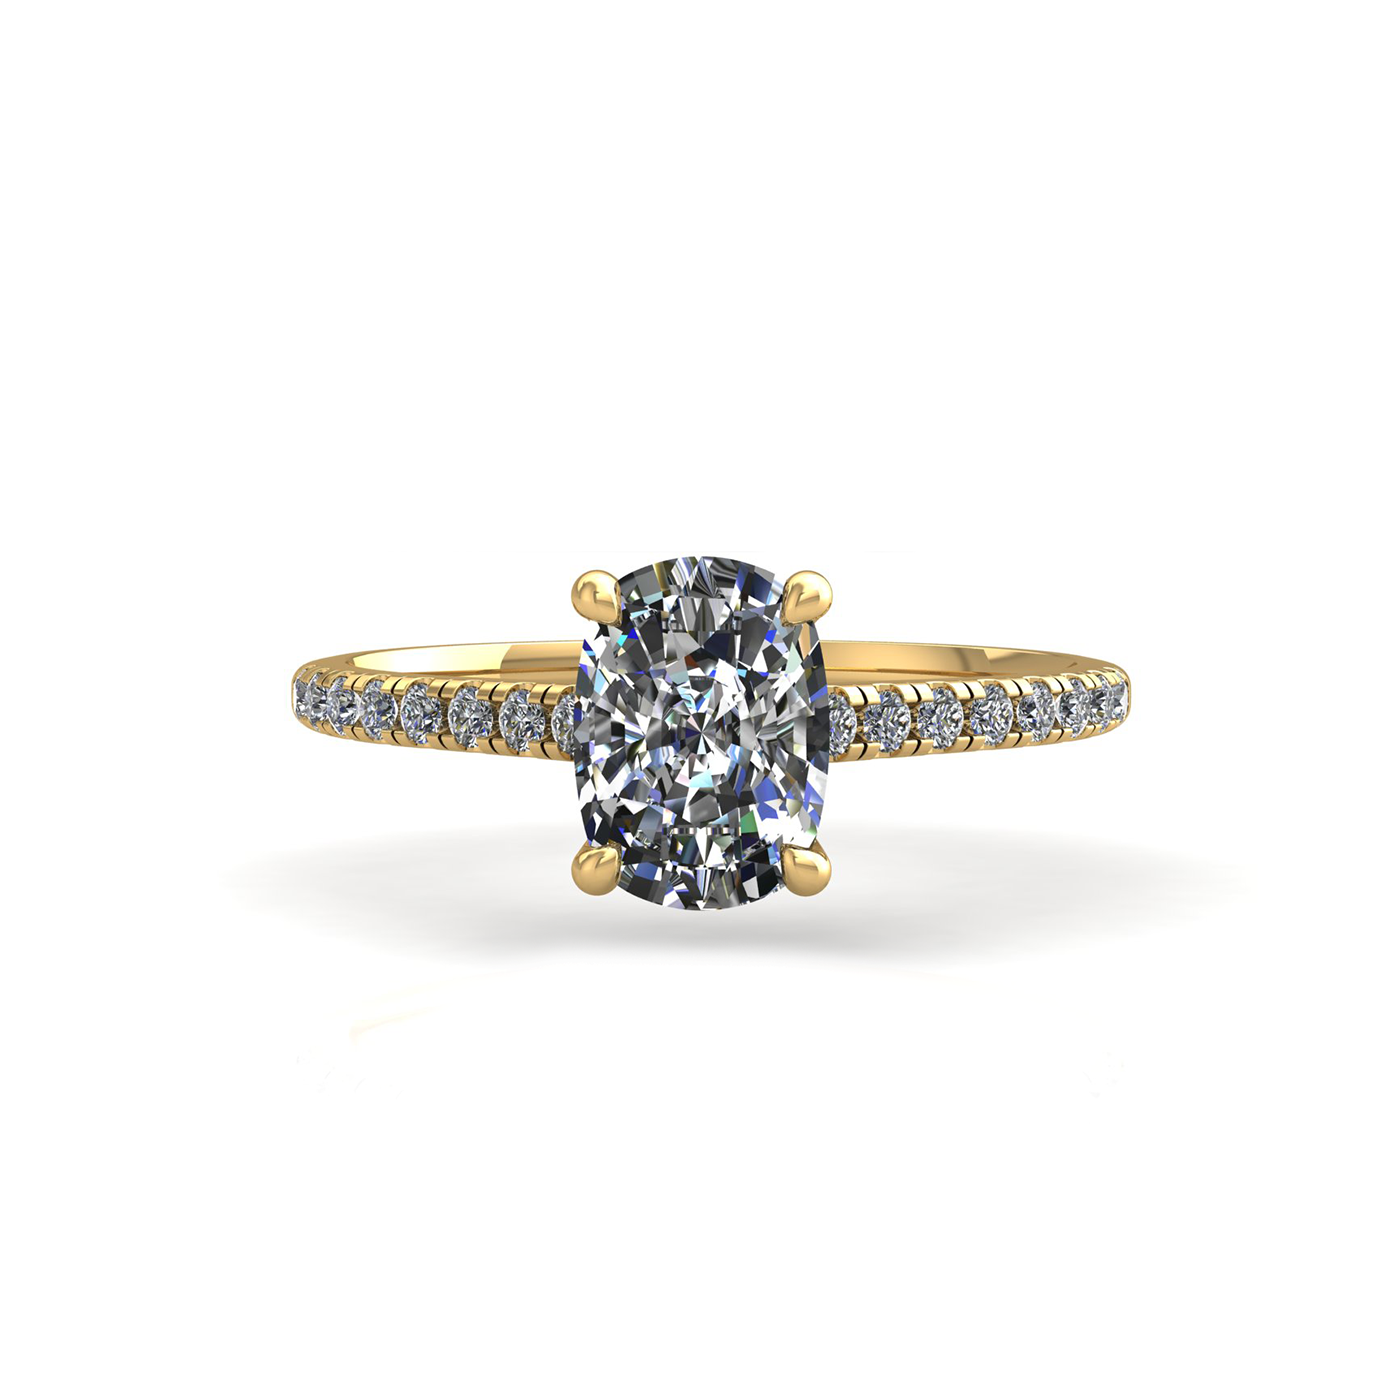 18k yellow gold  4 prongs elongated cushion cut diamond engagement ring with whisper thin pavÉ set band Photos & images